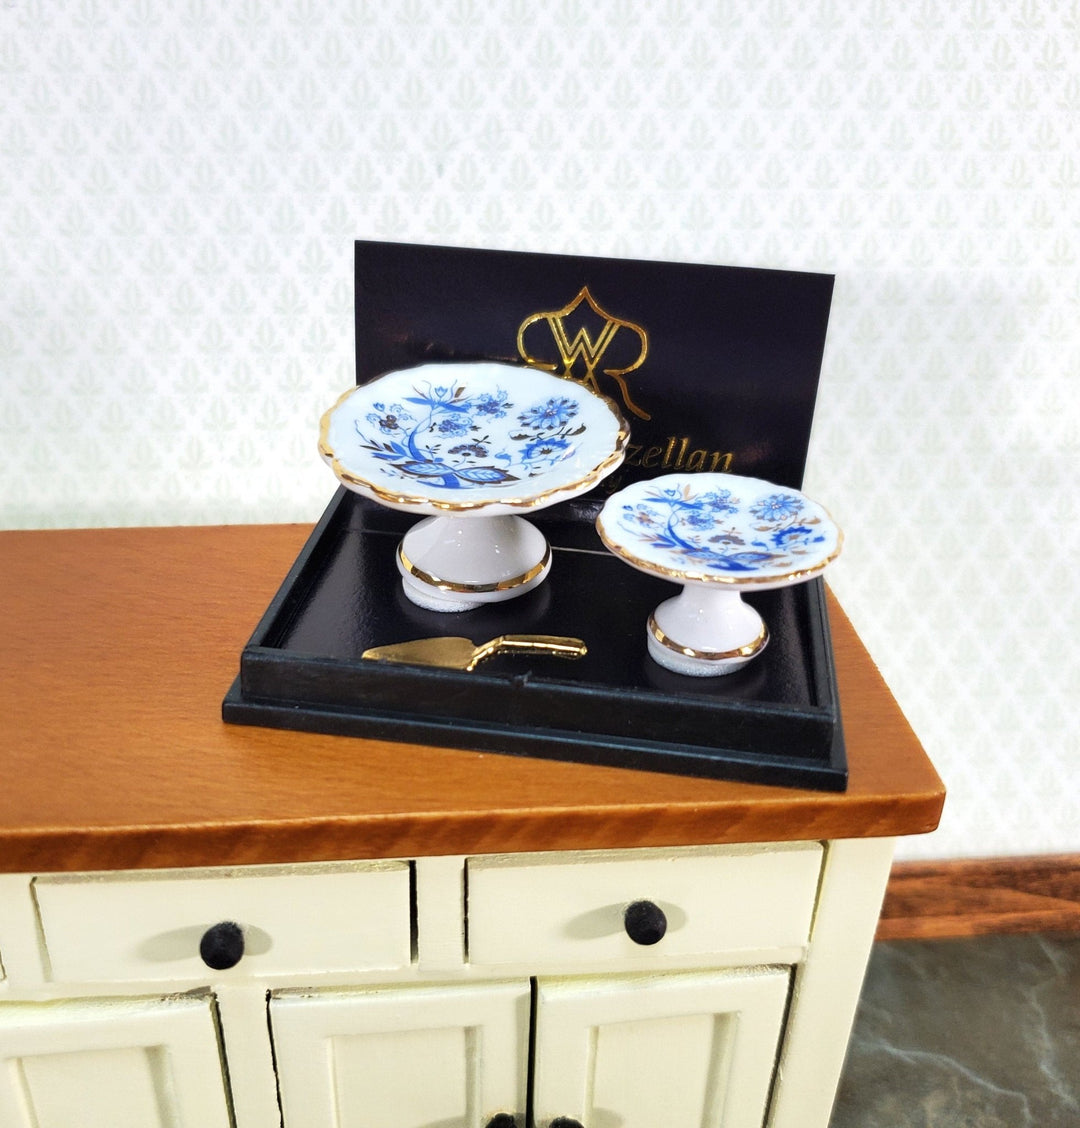 Reutter Porcelain Miniature Cake Stands Plates and Serving Utensil Dishes 1:12 Scale Dollhouse - Miniature Crush